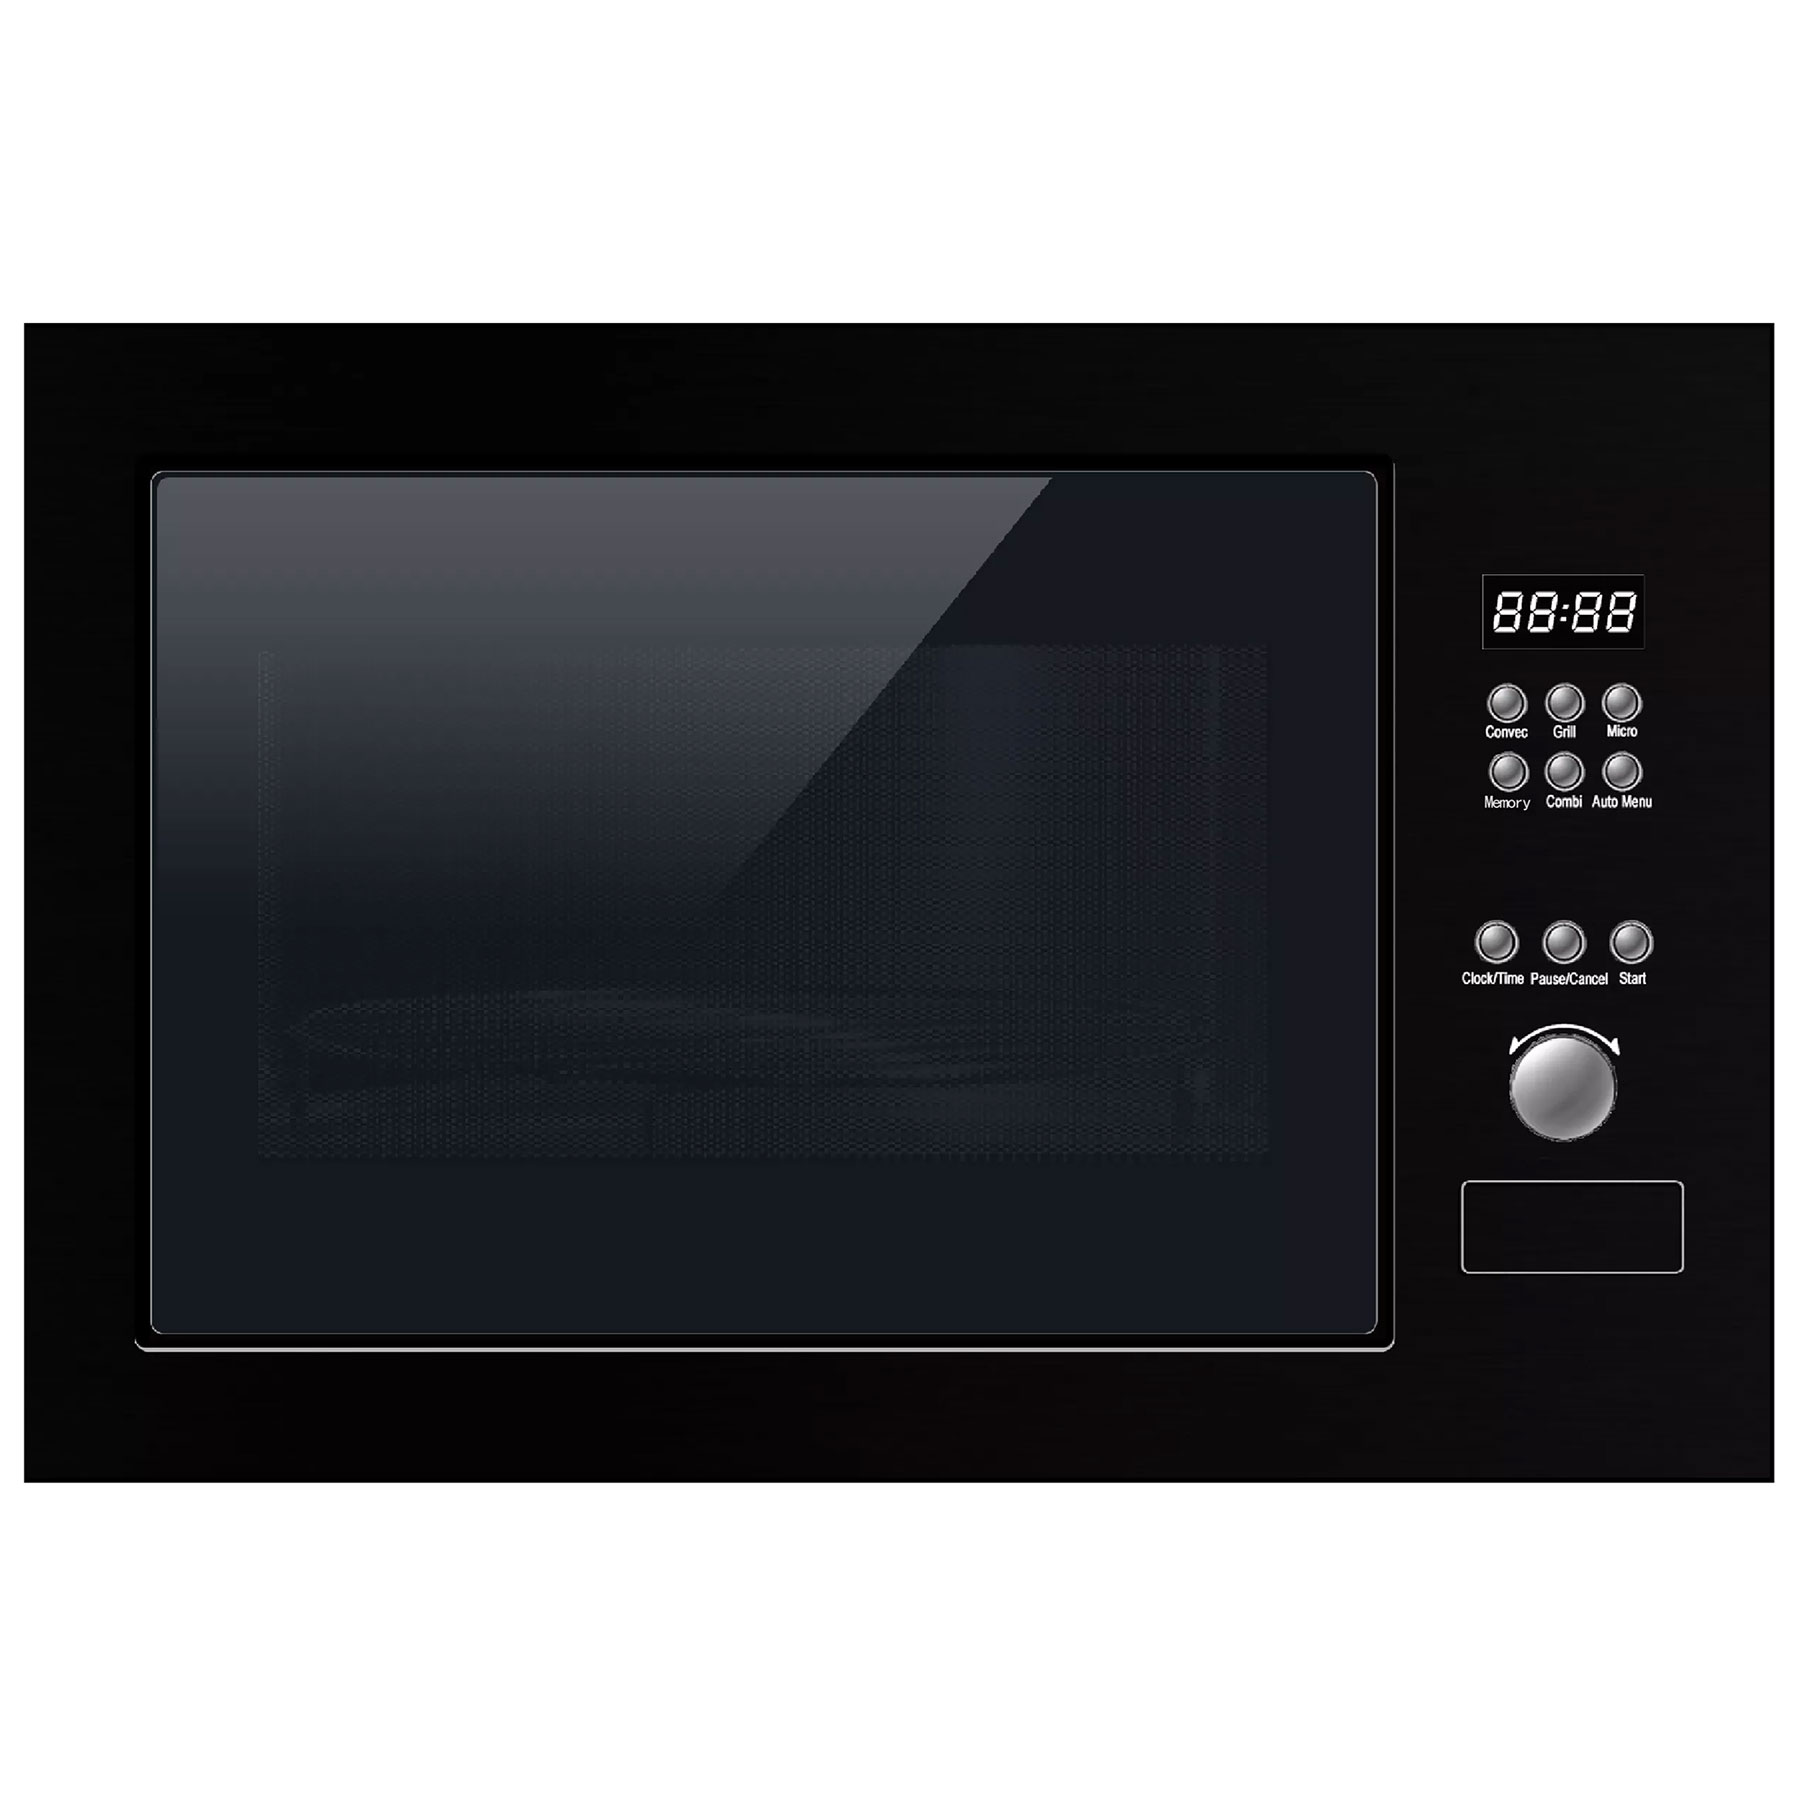 Image of Culina UBCOMBI31BK Built In Combination Microwave Oven in Black 900W 3